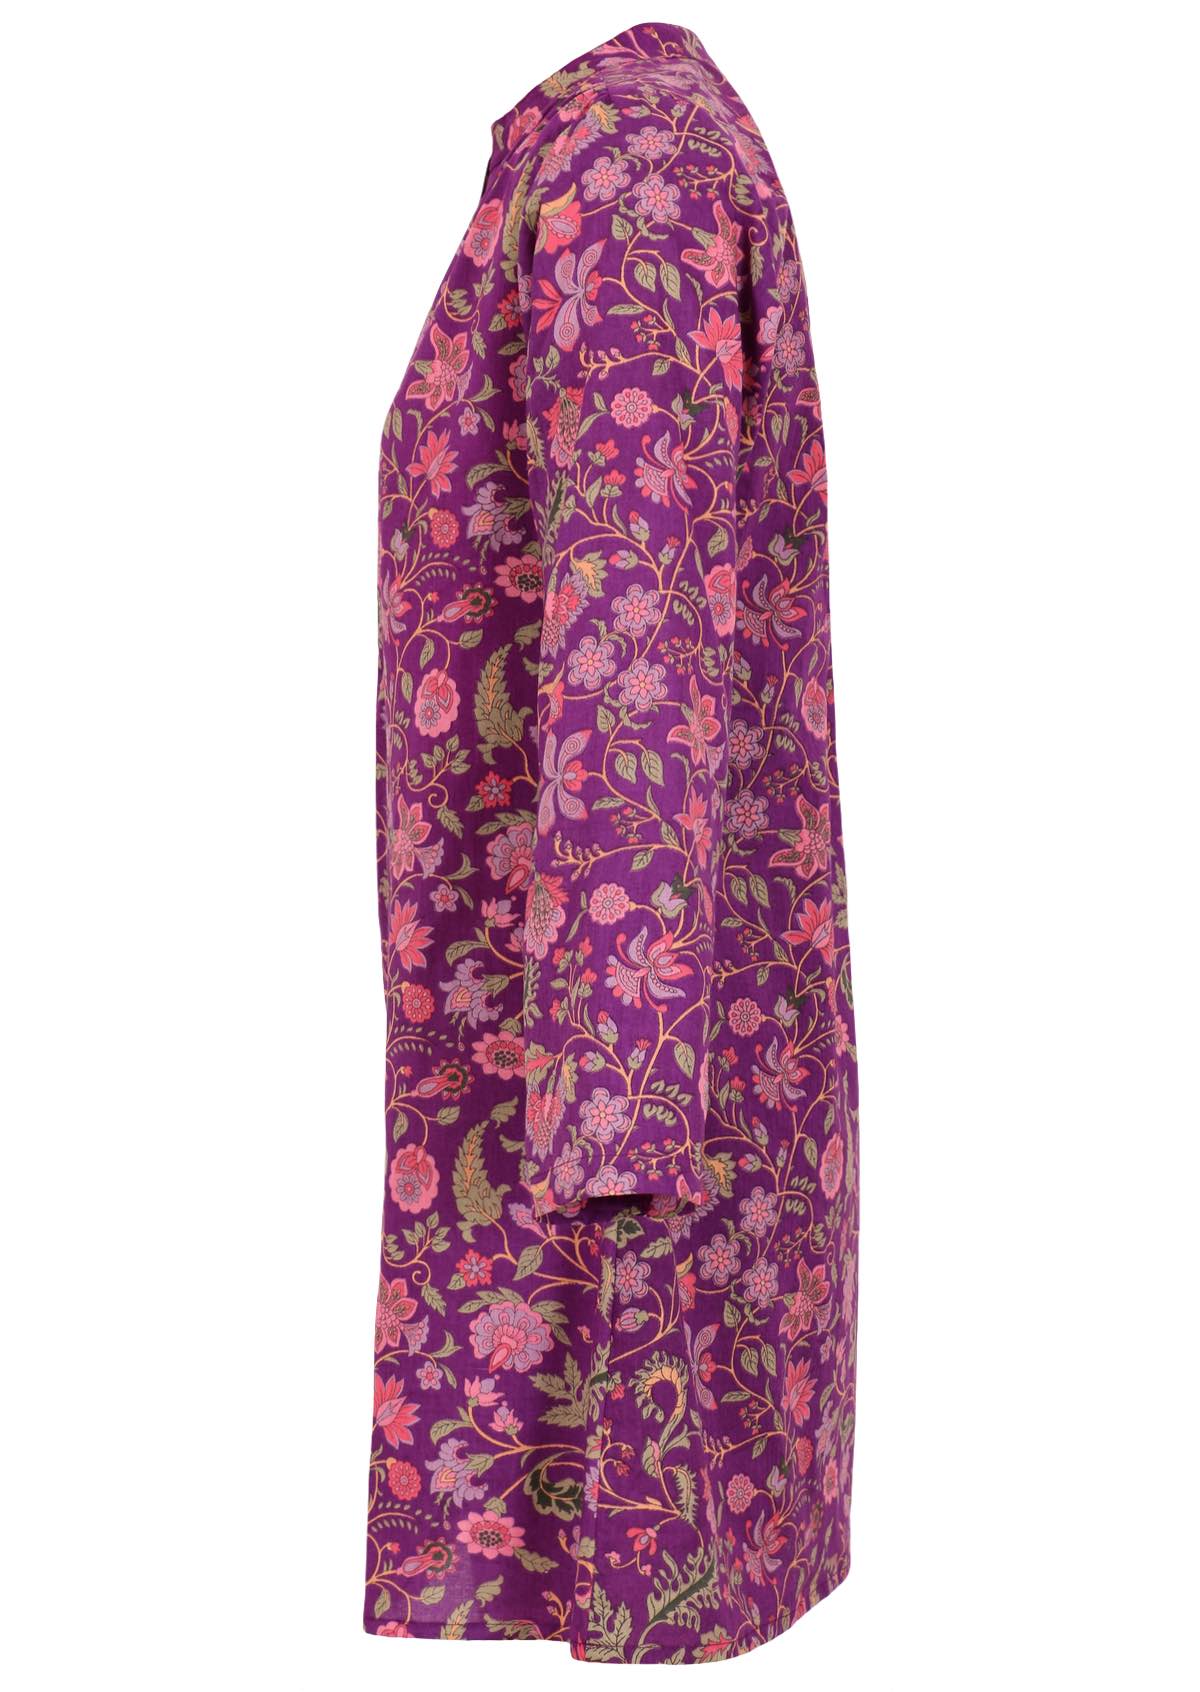 Long sleeve cotton tunic in purple floral print